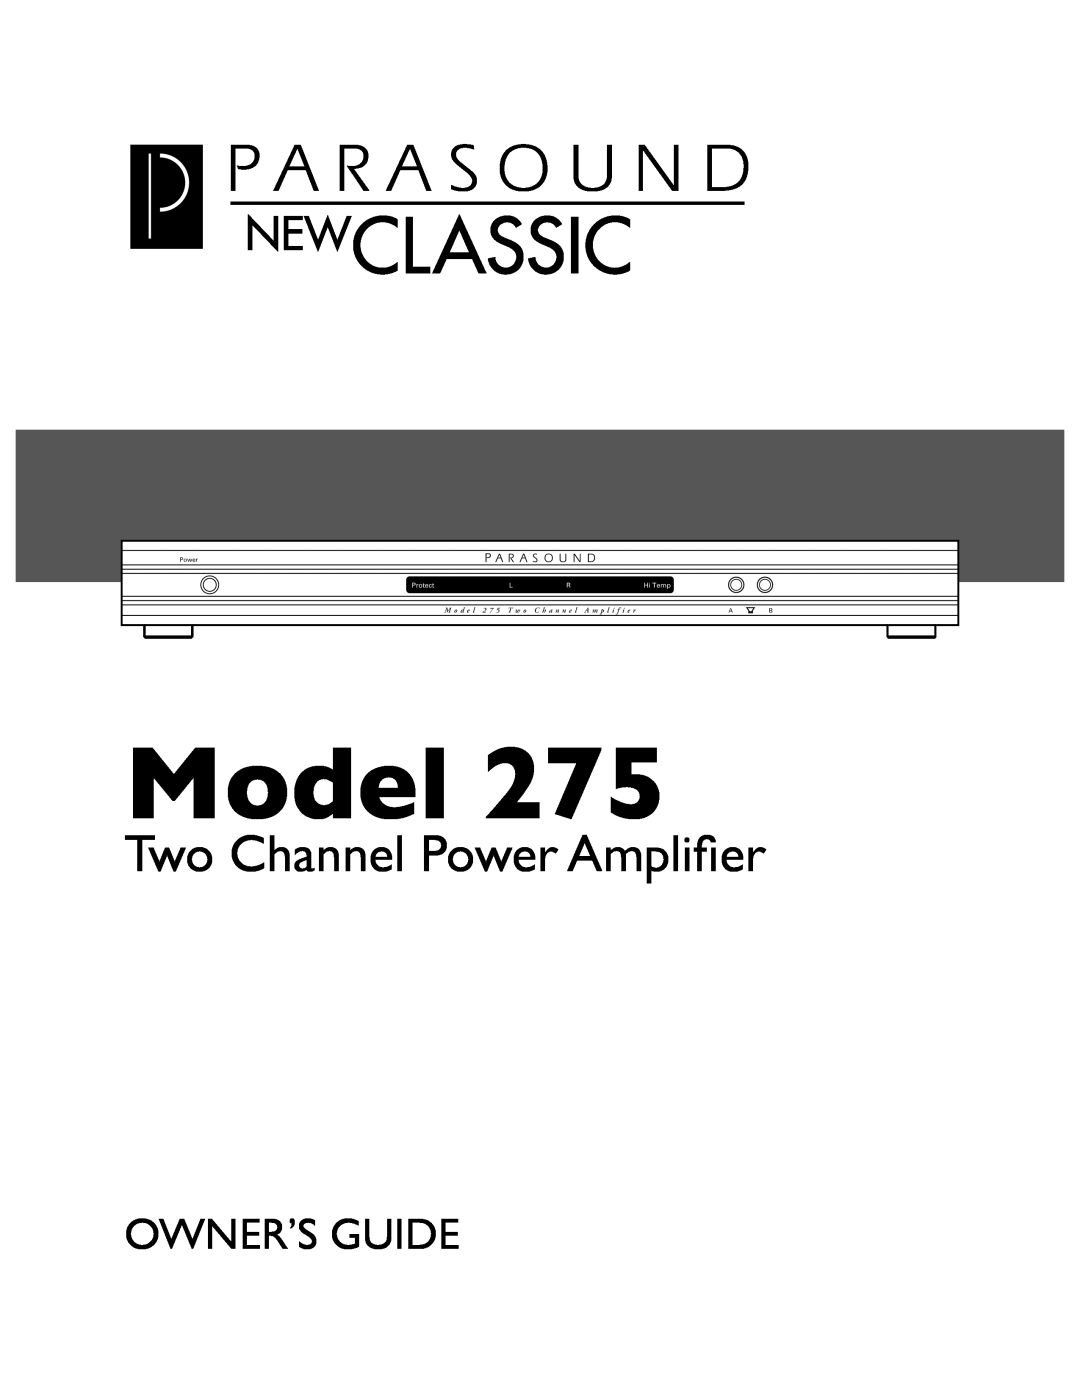 Parasound 275 manual Model, Two Channel Power Amplifier, Owner’S Guide, Protect, Hi Temp 